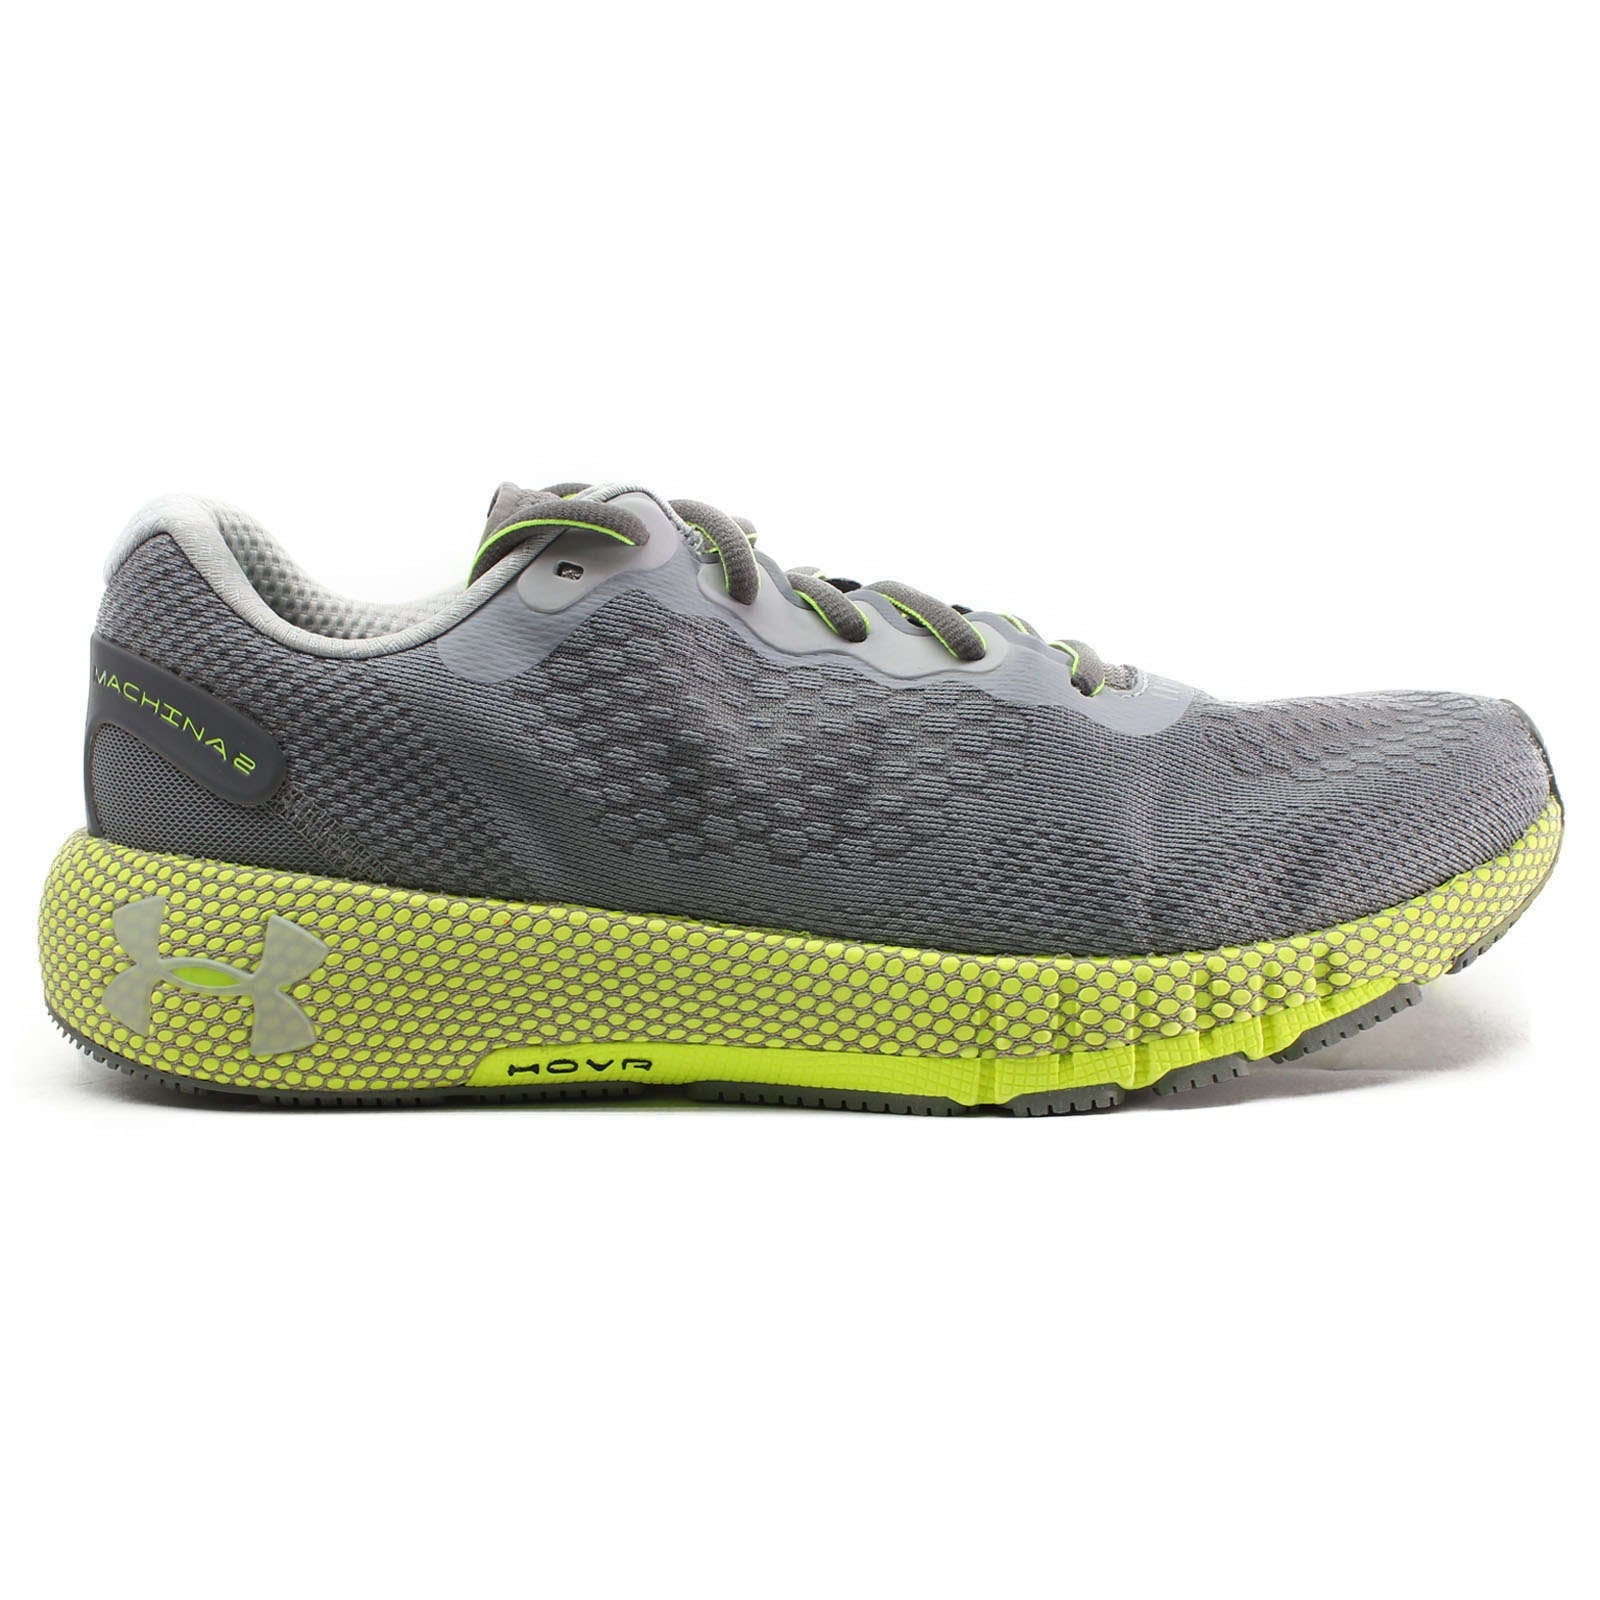 Under Armour HOVR Machina 2 Synthetic Textile Men's Low-Top Sneakers#color_grey yellow